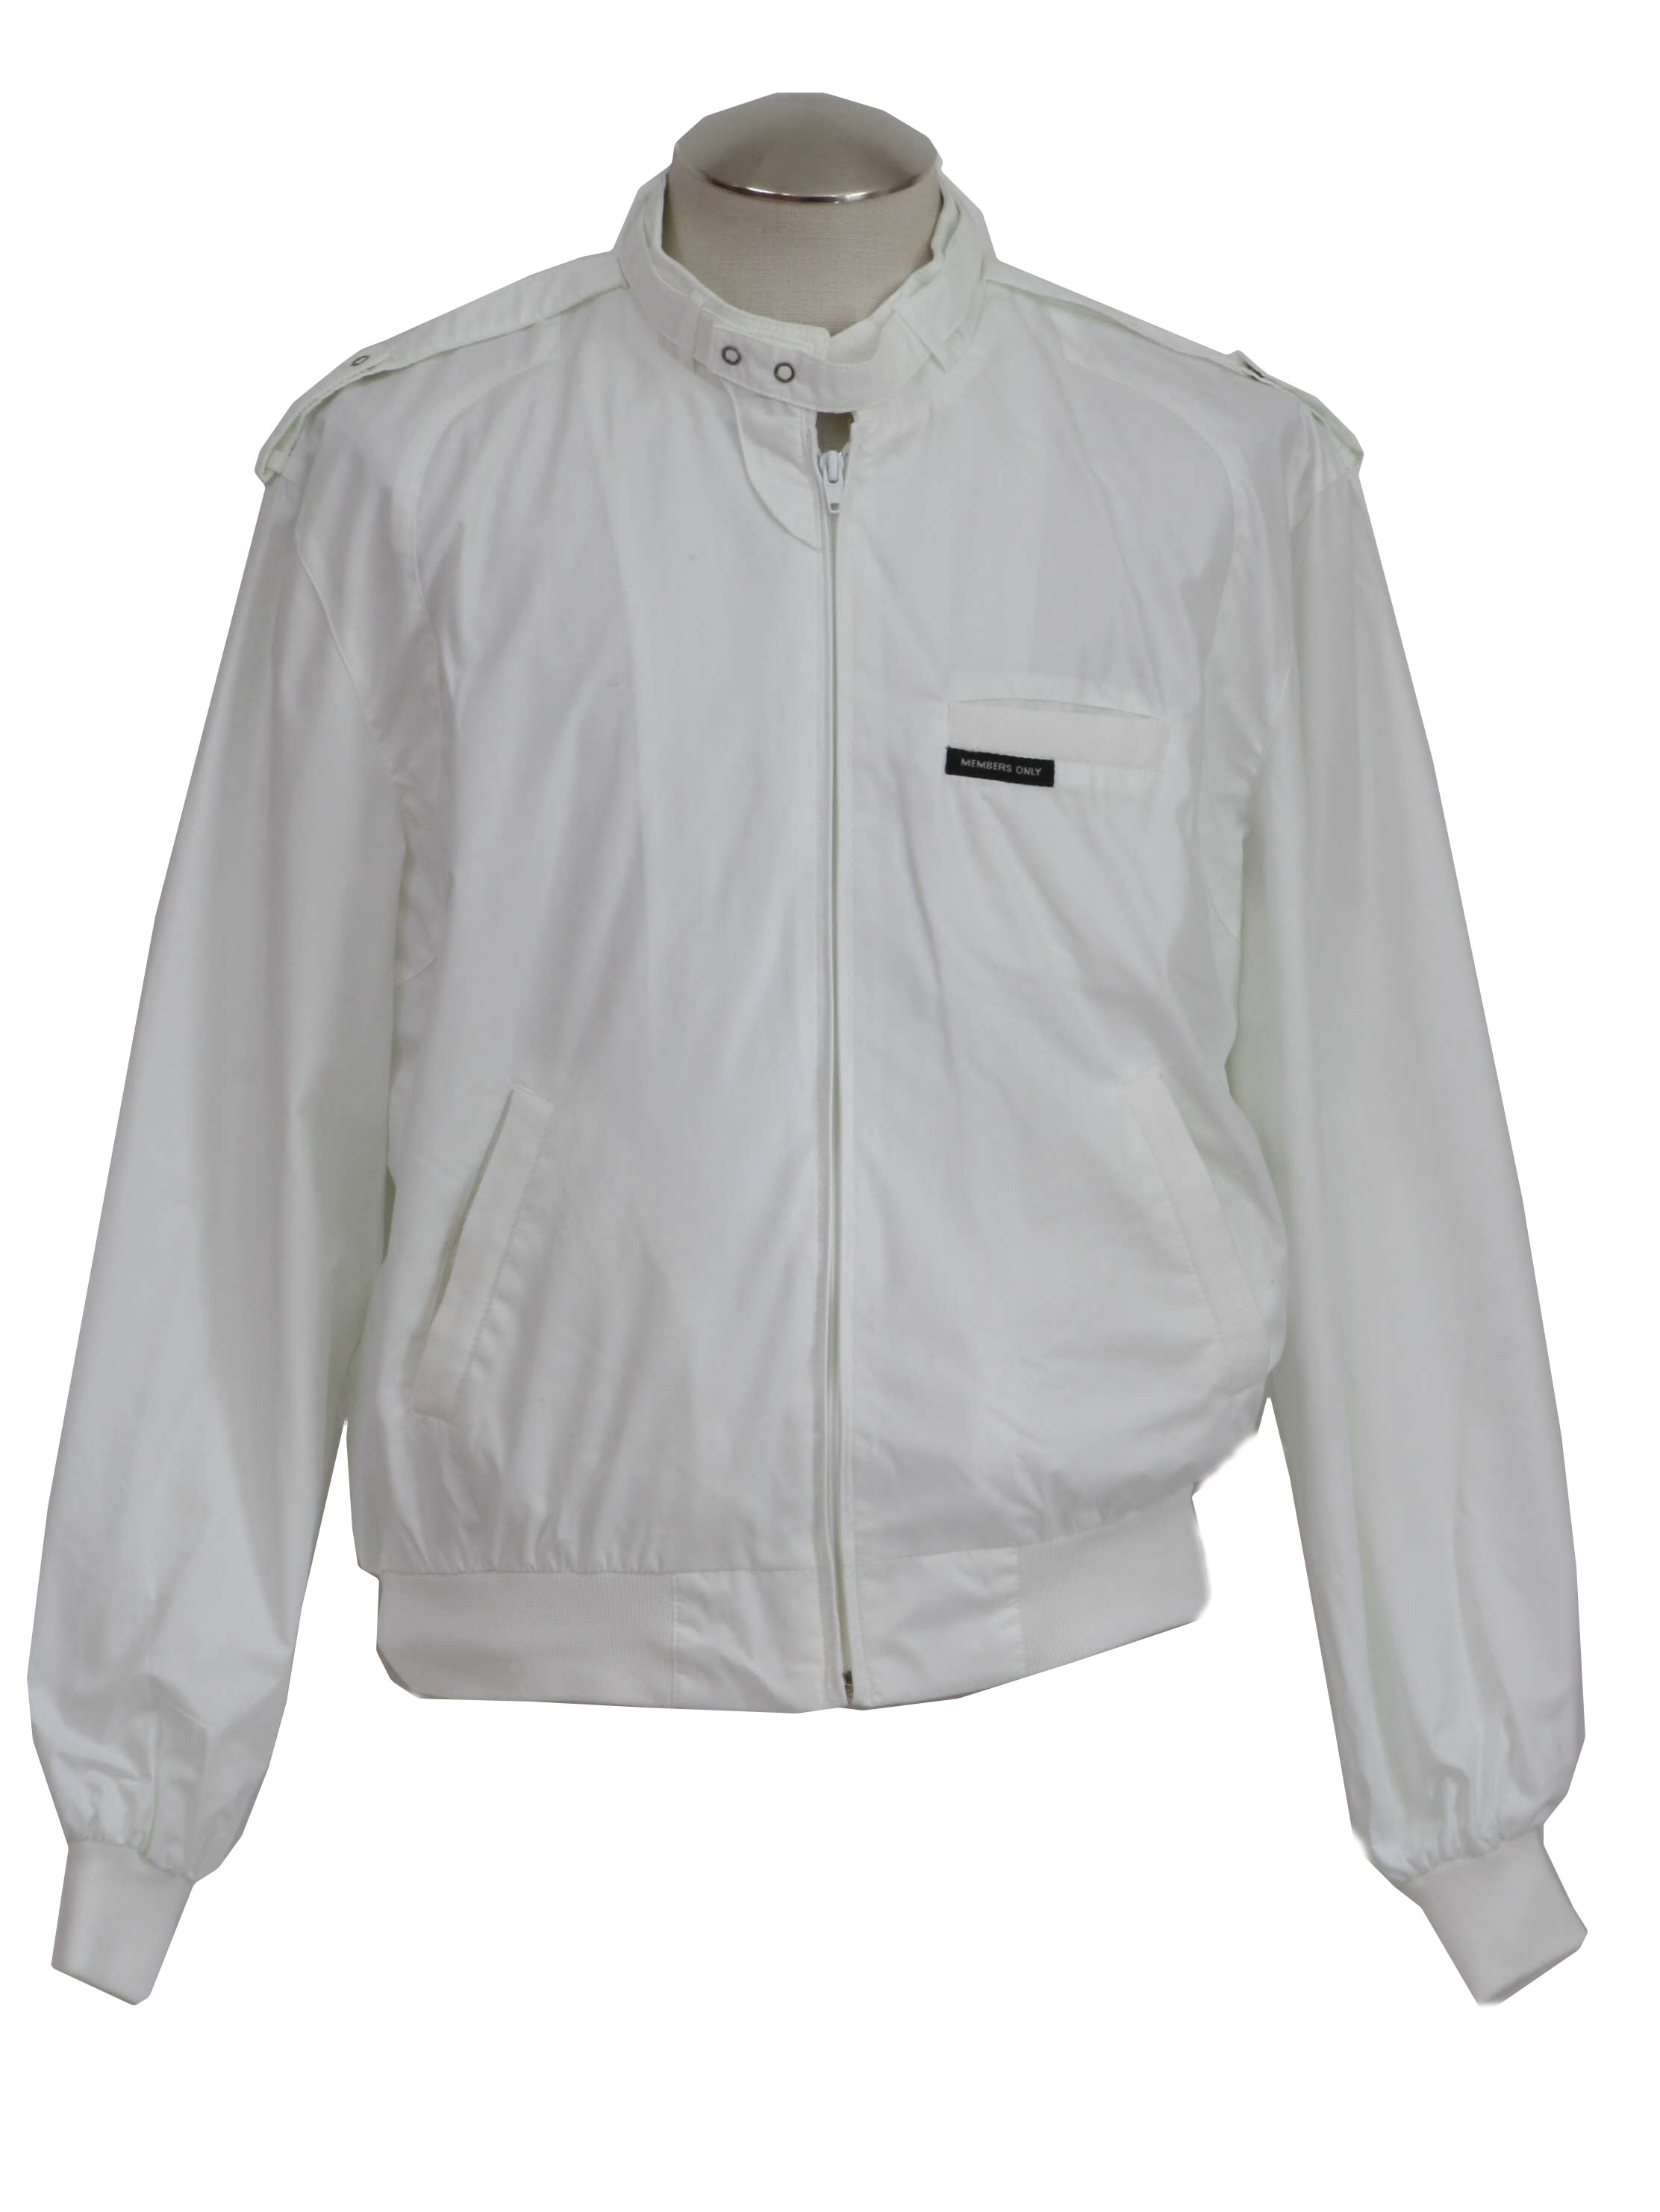 80's Vintage Jacket: 80s -Members Only- Mens white cotton polyester ...